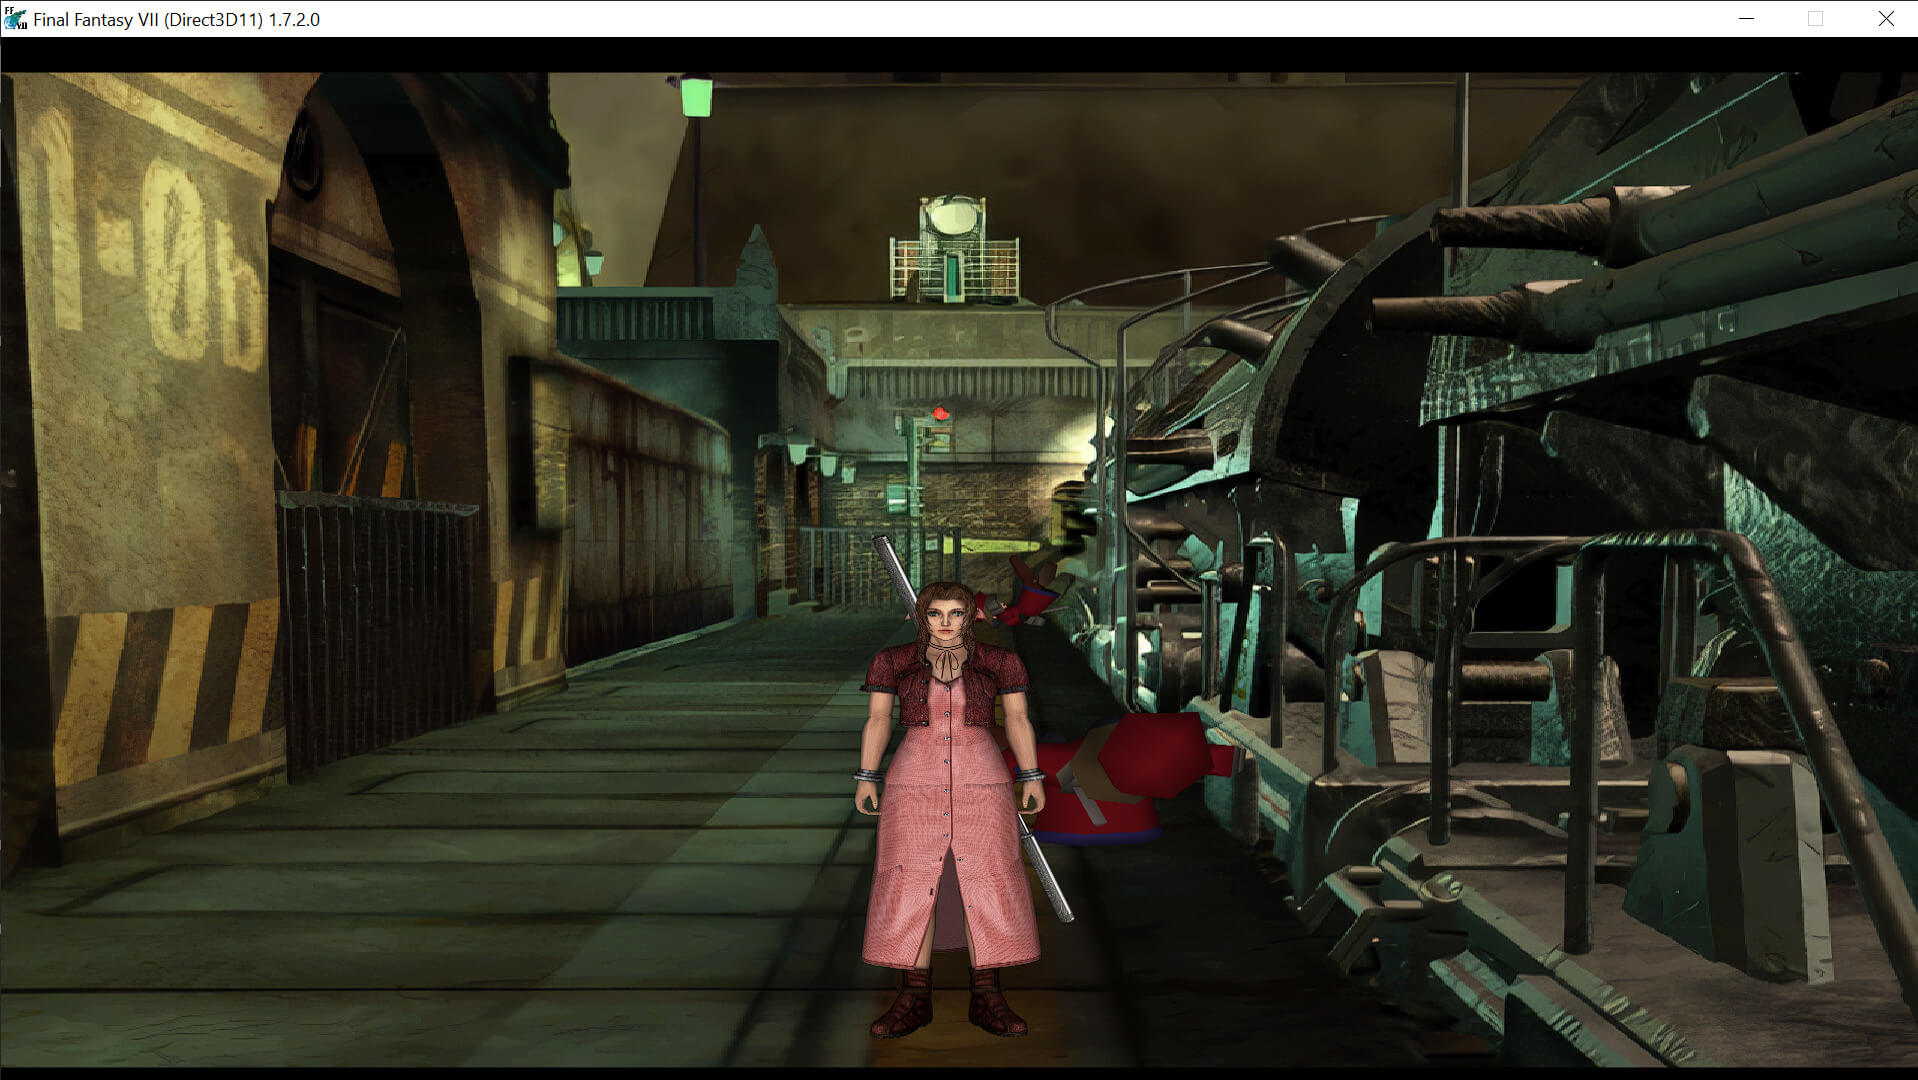 Final Fantasy 7 Mod aims to bring the new high-quality 3D models from